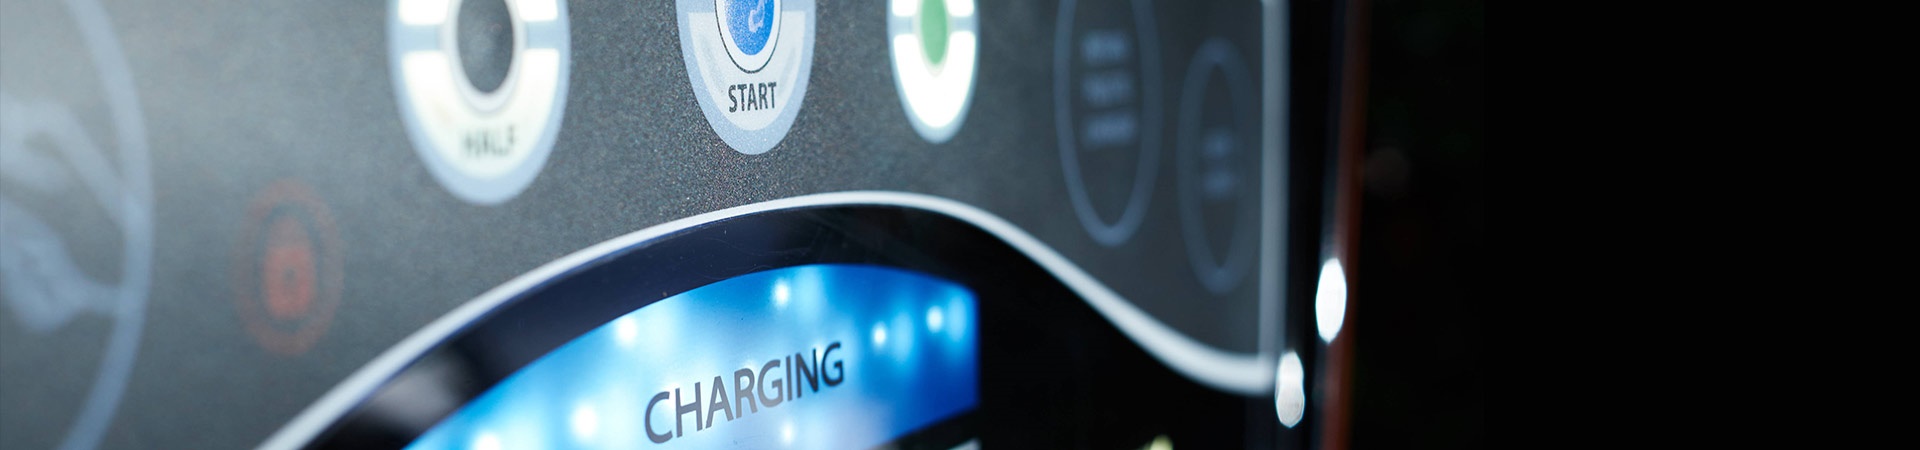 Electric vehicle dashboard that shows the Start button and the word Charging